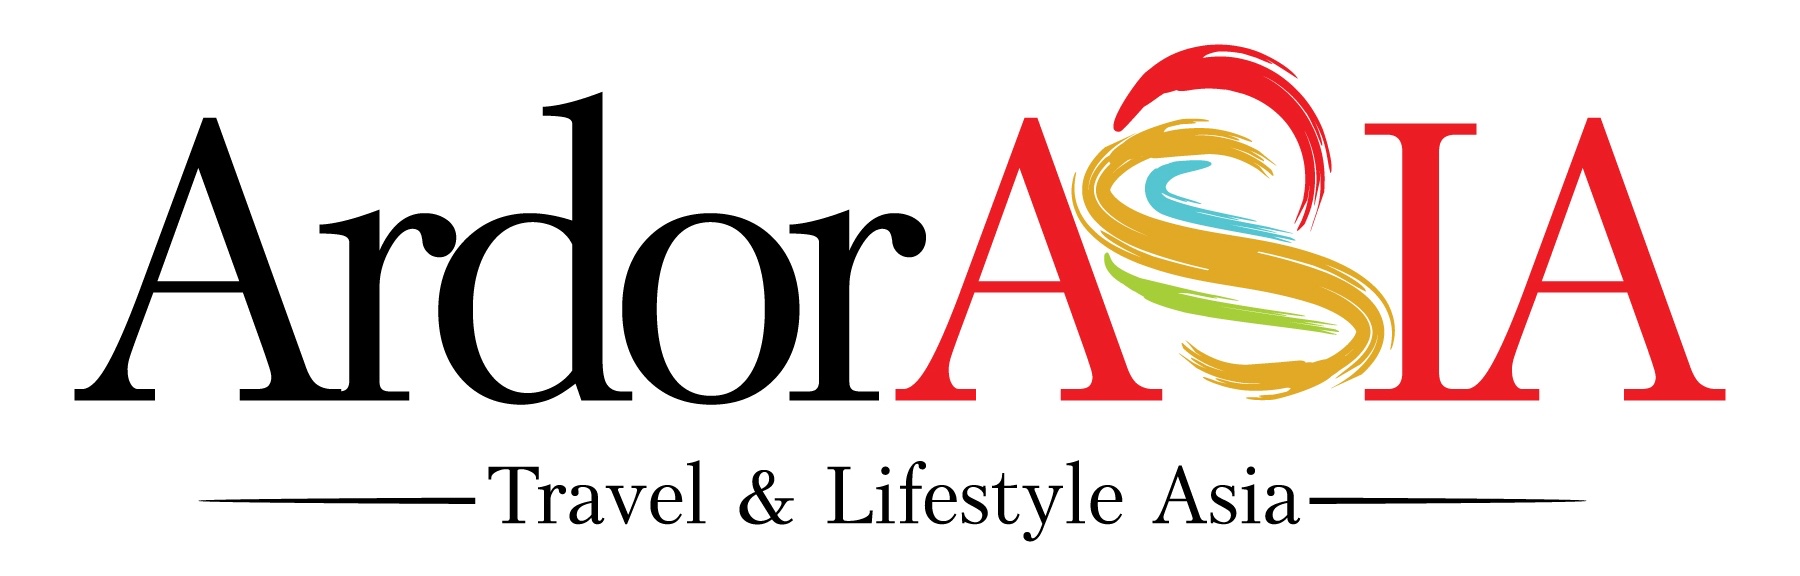 ArdorAsia – Best Places To Visit In Asia